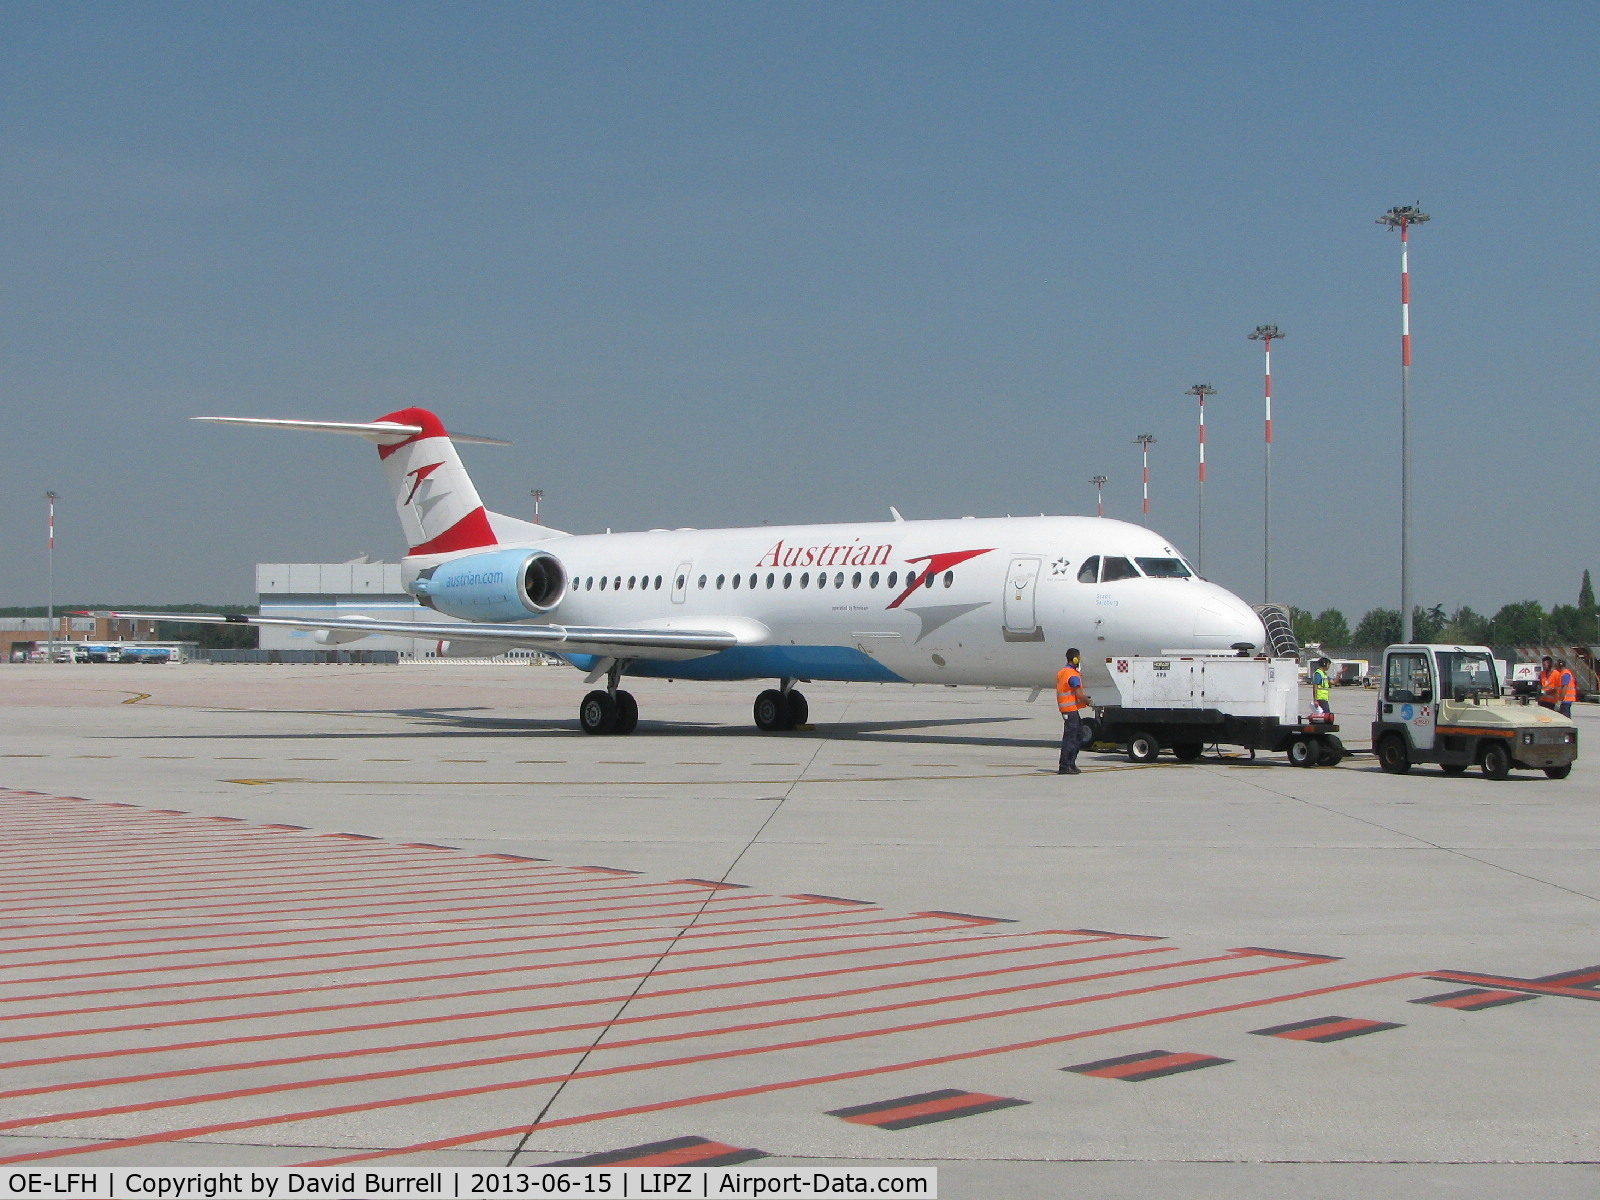 OE-LFH, 1995 Fokker 70 (F-28-0070) C/N 11554, OE-LFH Stadt Salzburg Fokker 70 at Marco Polo Airport Venice